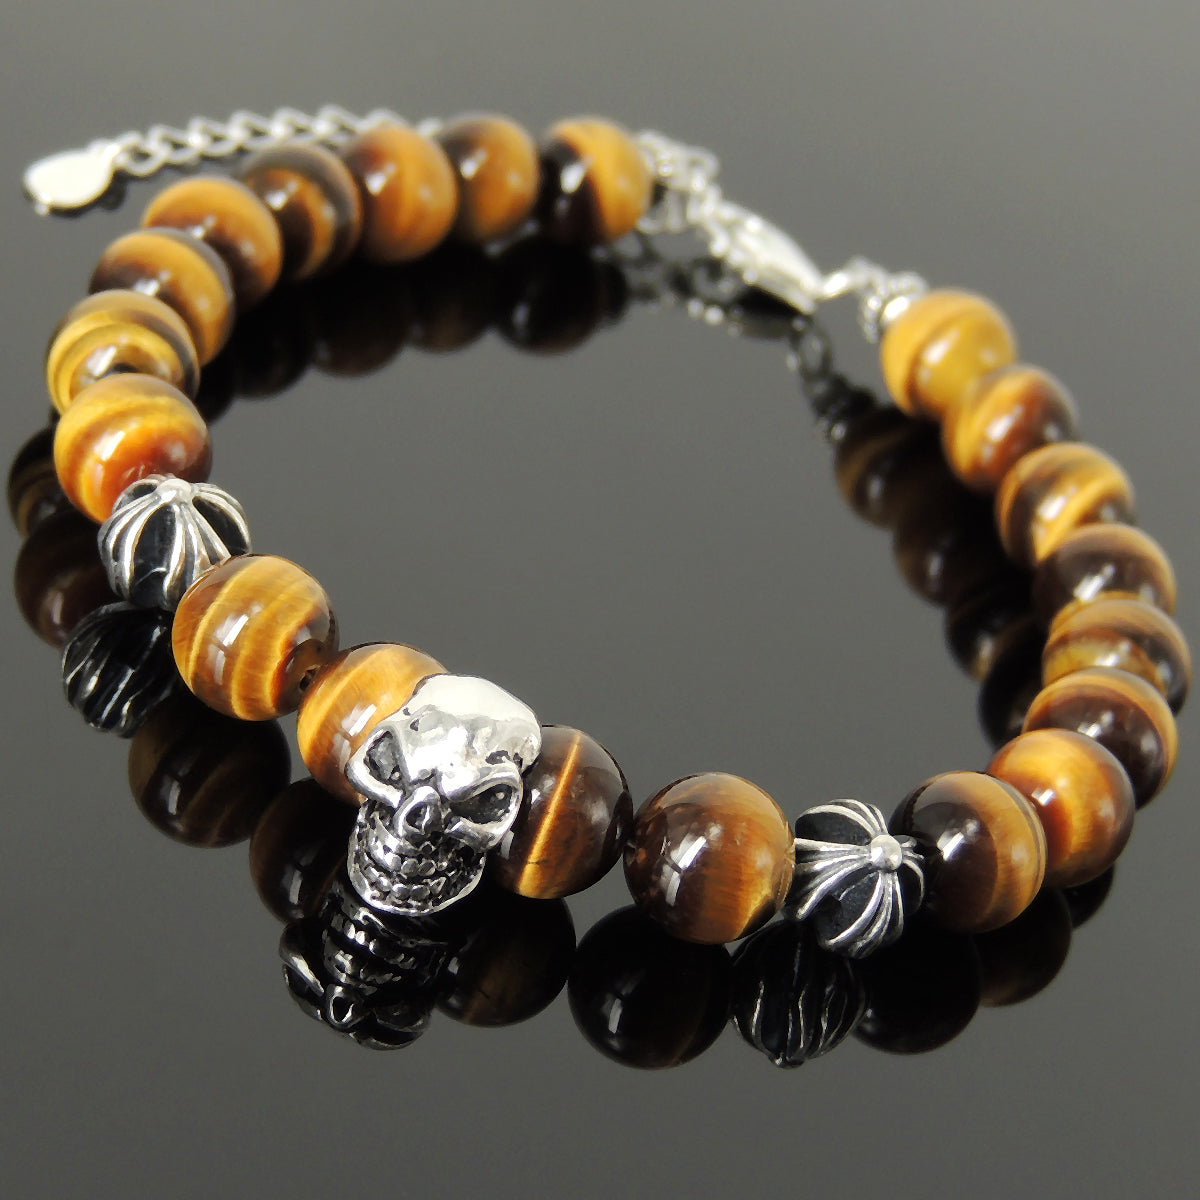 Handmade Spiritual Skull & Cross Clasp Bracelet with Healing 8mm Grade AAA Brown Tiger Eye Gemstones with Genuine S925 Sterling Silver Parts - BR1468